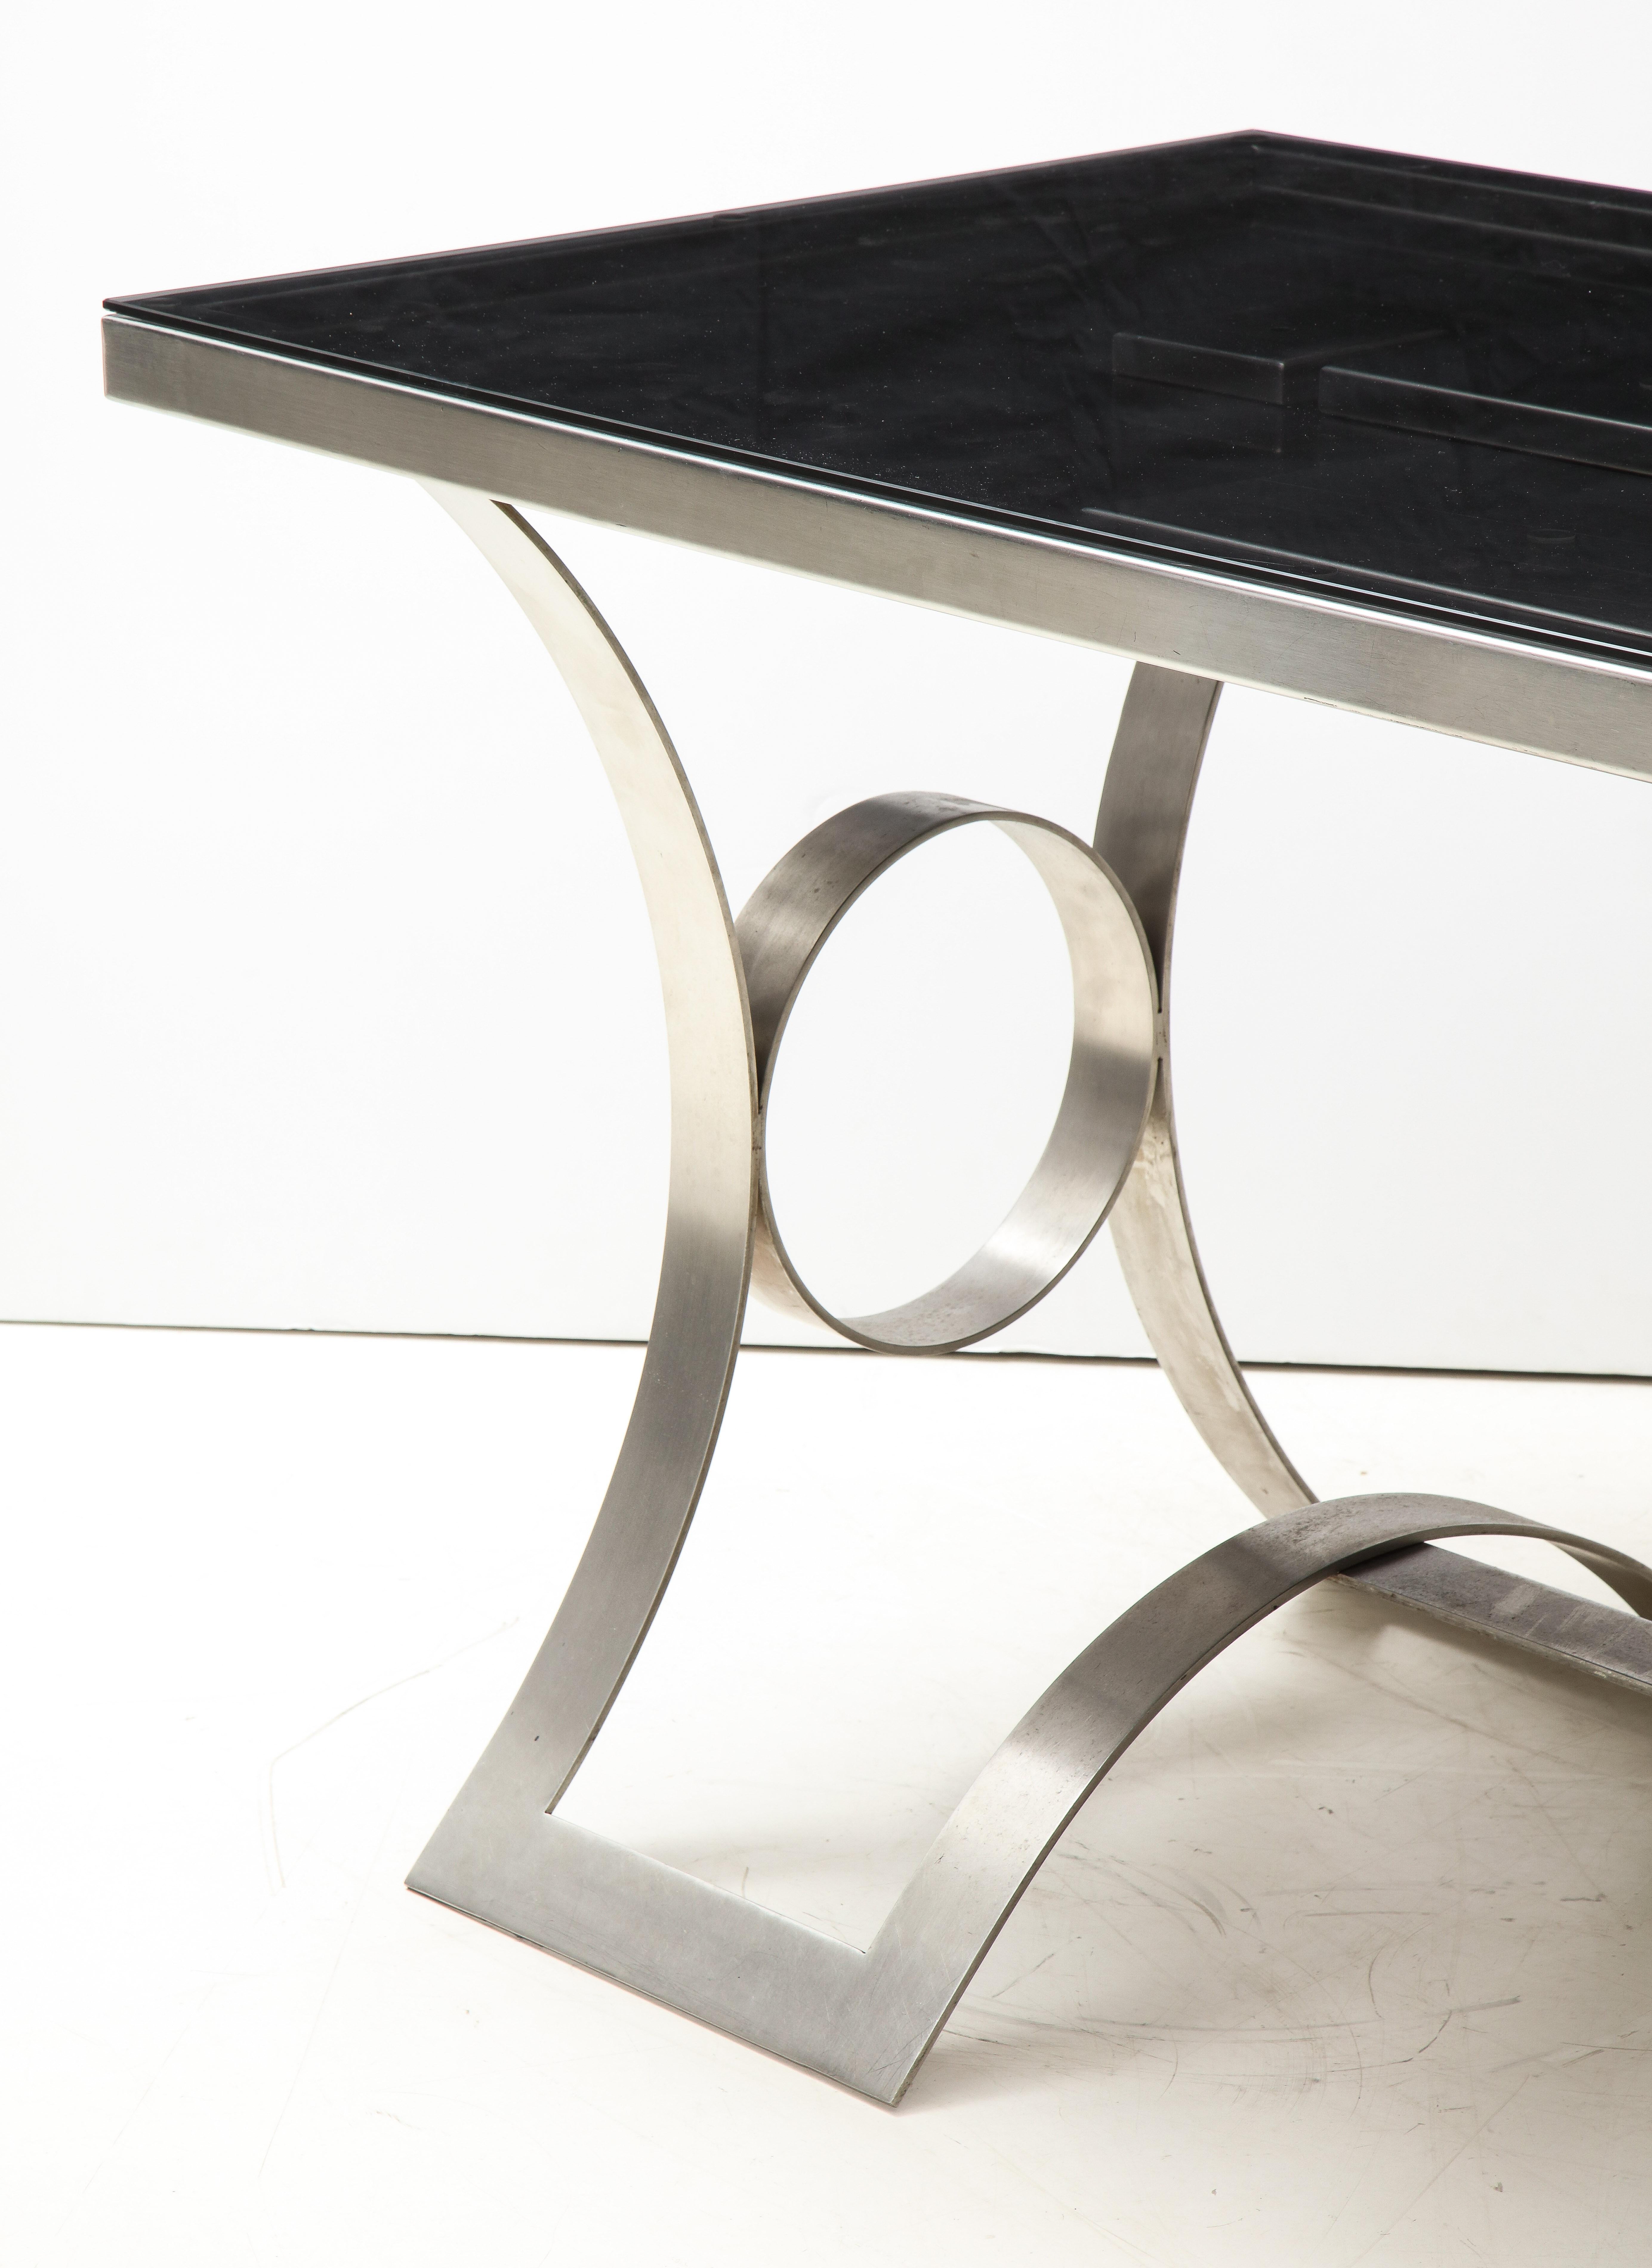 Rare Stainless Steel Desk with Smoked Grey Glass Top, France, c. 1970 For Sale 7